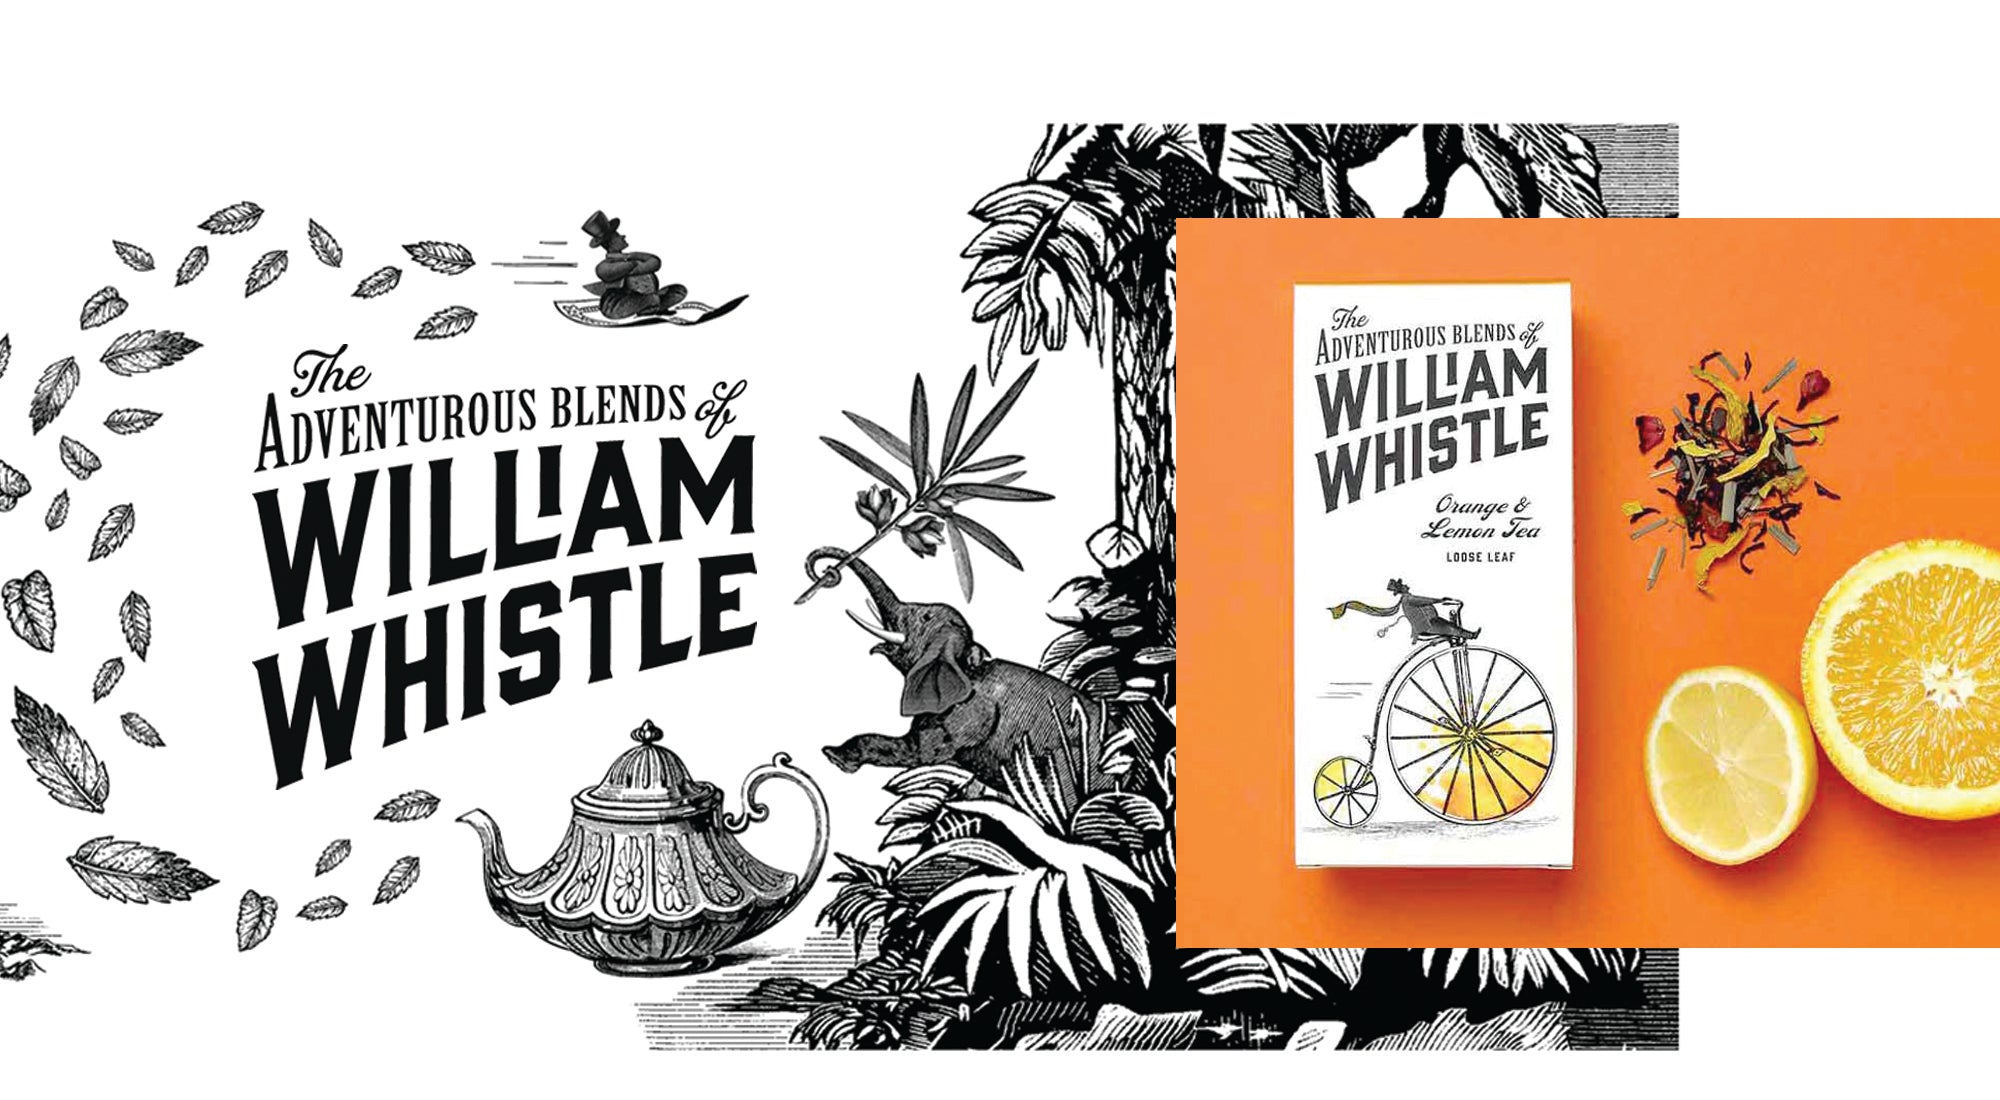 The Adventurous Blends of William Whistle